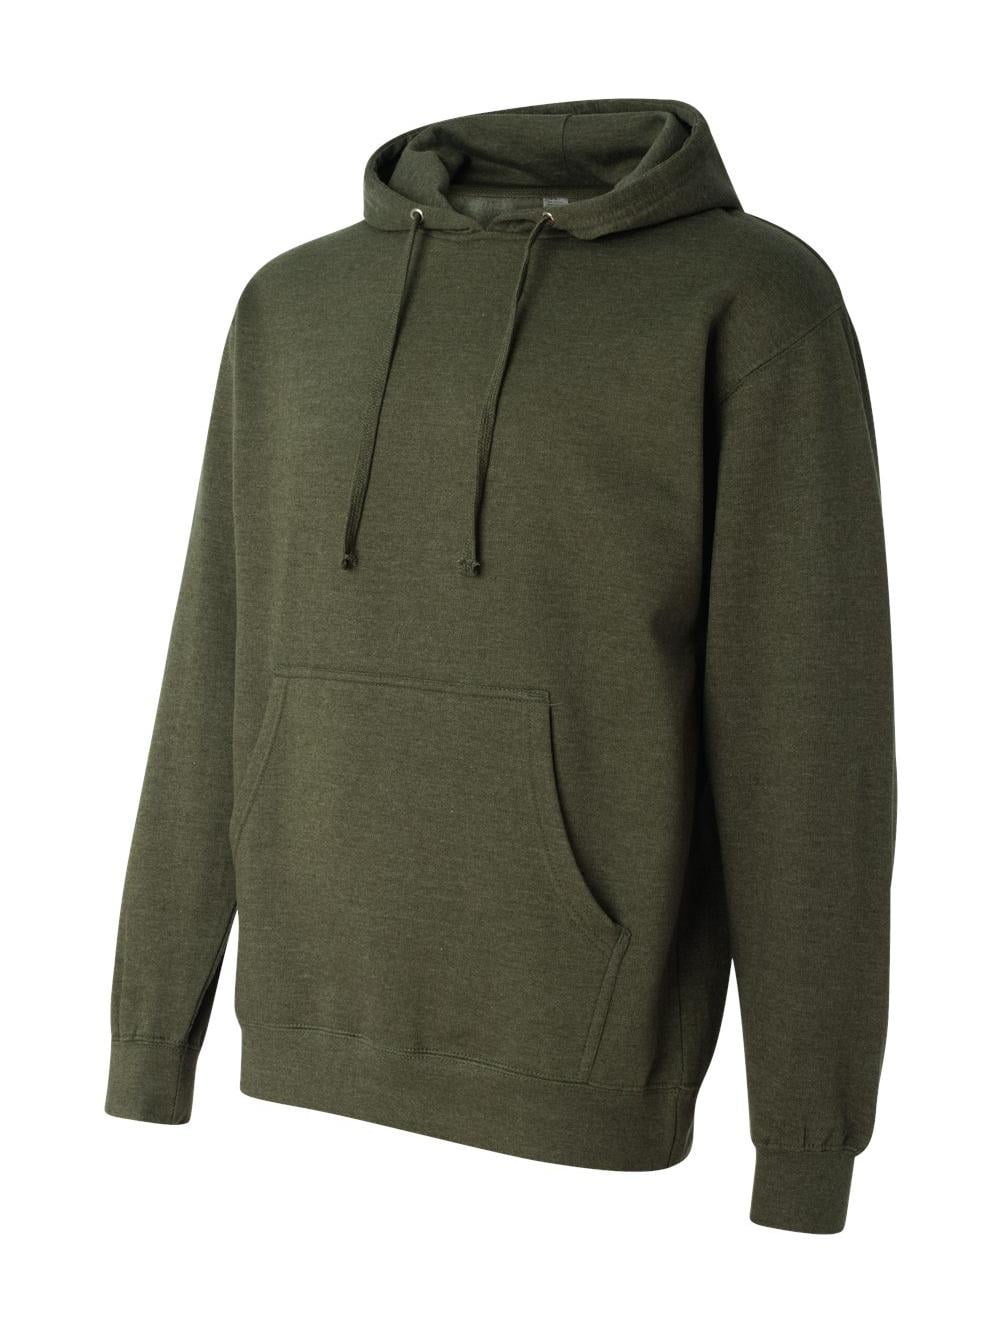 Independent Trading Co. Midweight Hooded Sweatshirt SS4500 Army Heather ...